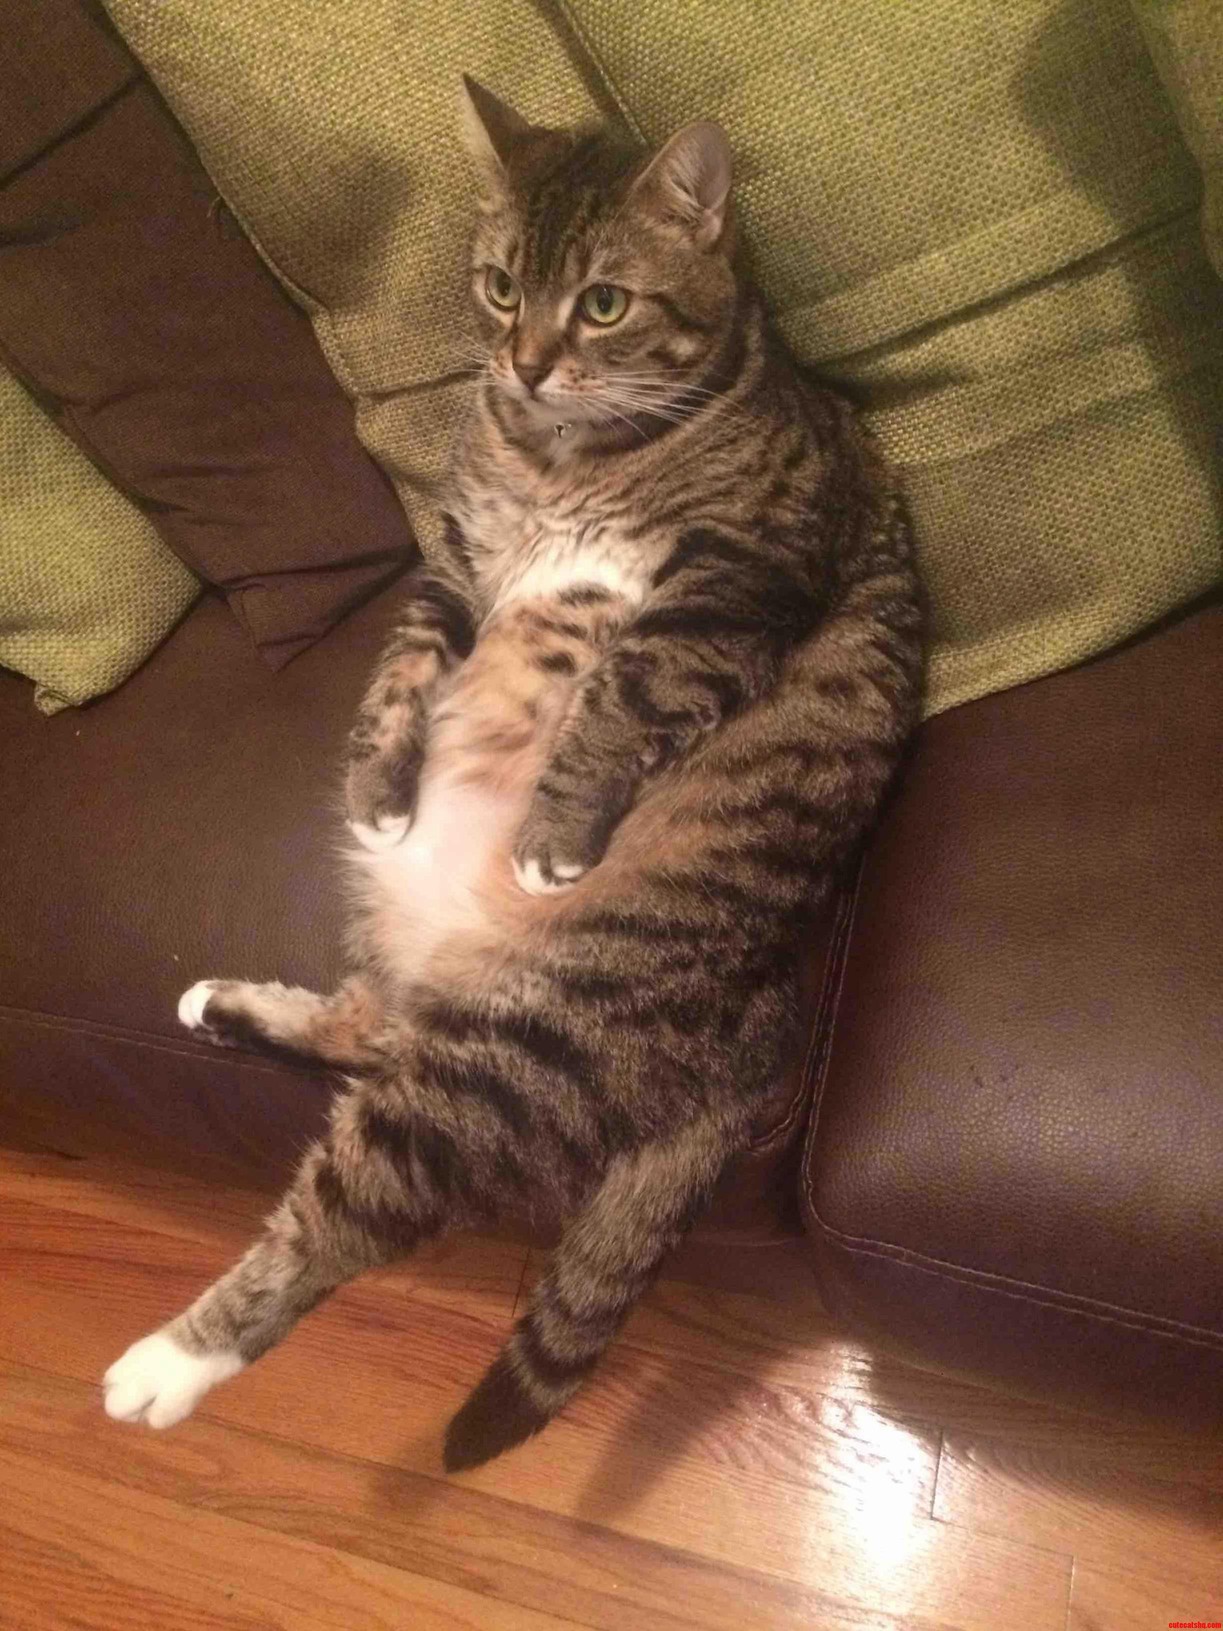 Found my cat sitting like this when i got home.